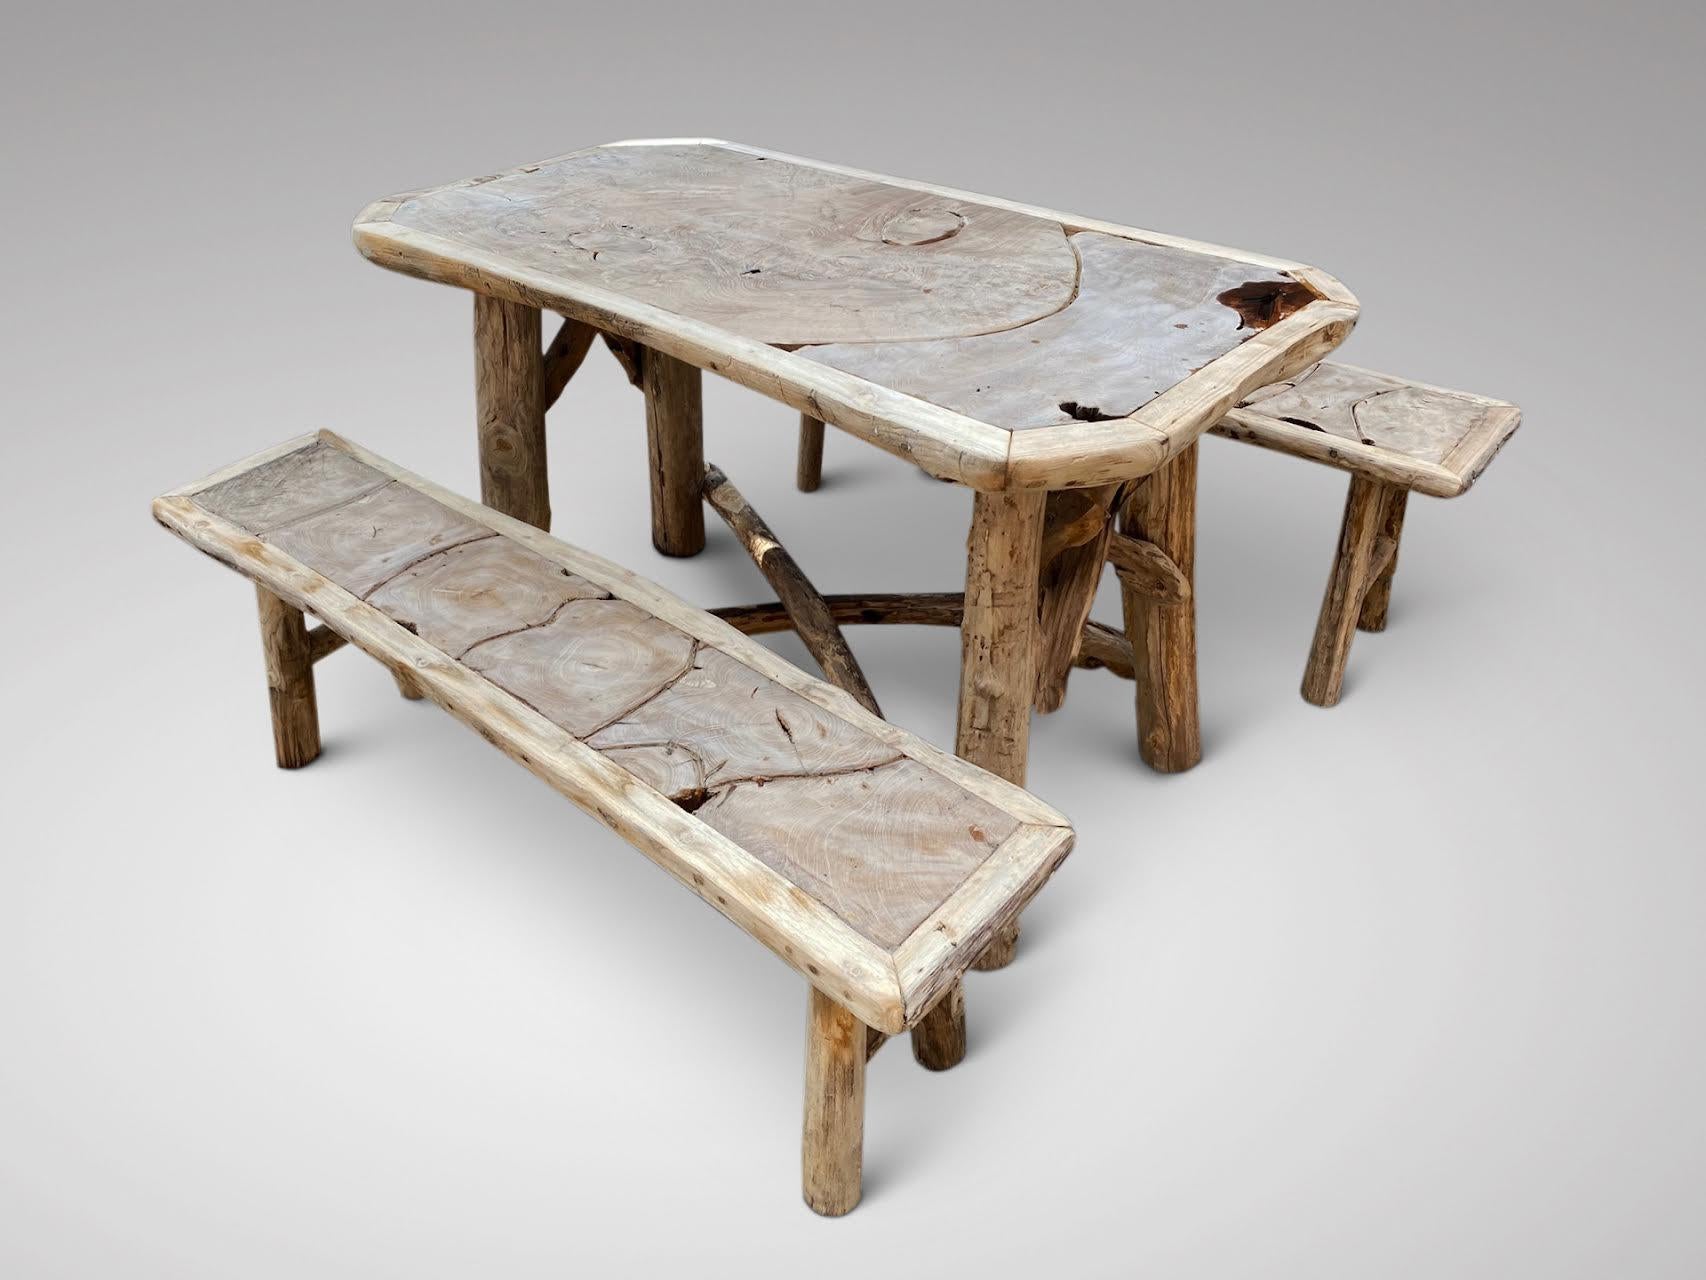 A quirky 20th century unusual rustic garden furniture set made from driftwood and olive wood. The set comprises of a table and two matching benches. The table top with solid olive wood top and driftwood to the edges and base. The benches have olive